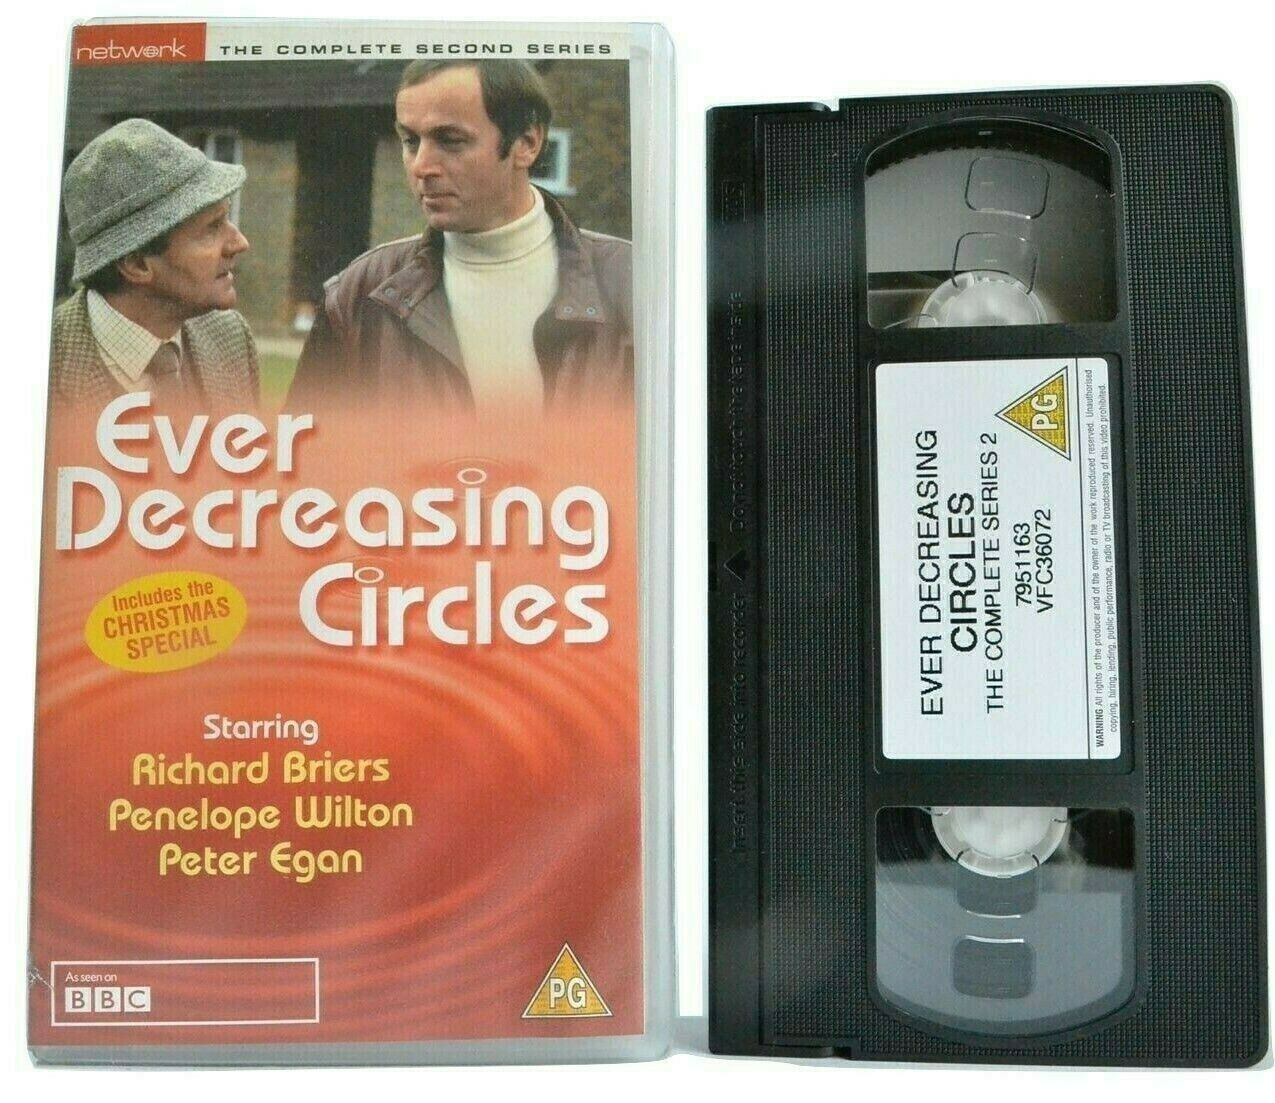 Ever Decreasing Circles [Complete 2nd Series] BBC Comedy - Richard Briers - VHS-